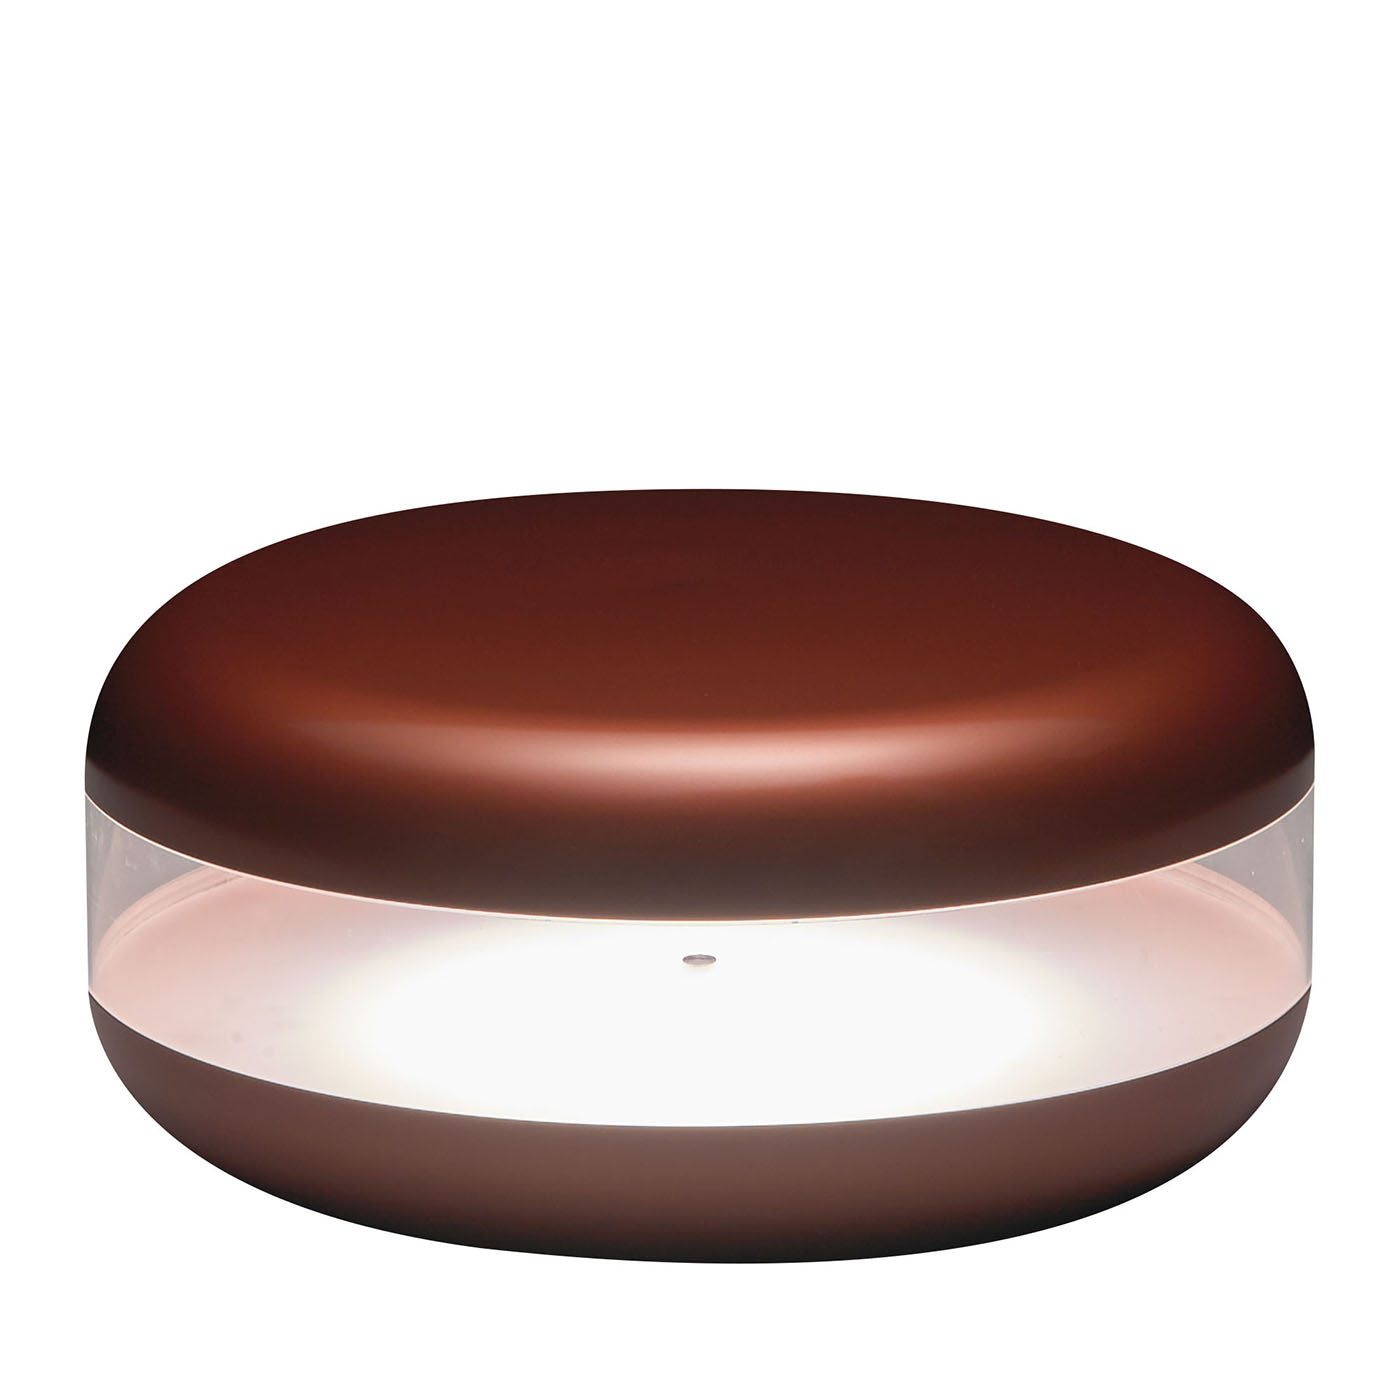 Macaron Red Table Lamp by Parisotto + Formenton - Main view